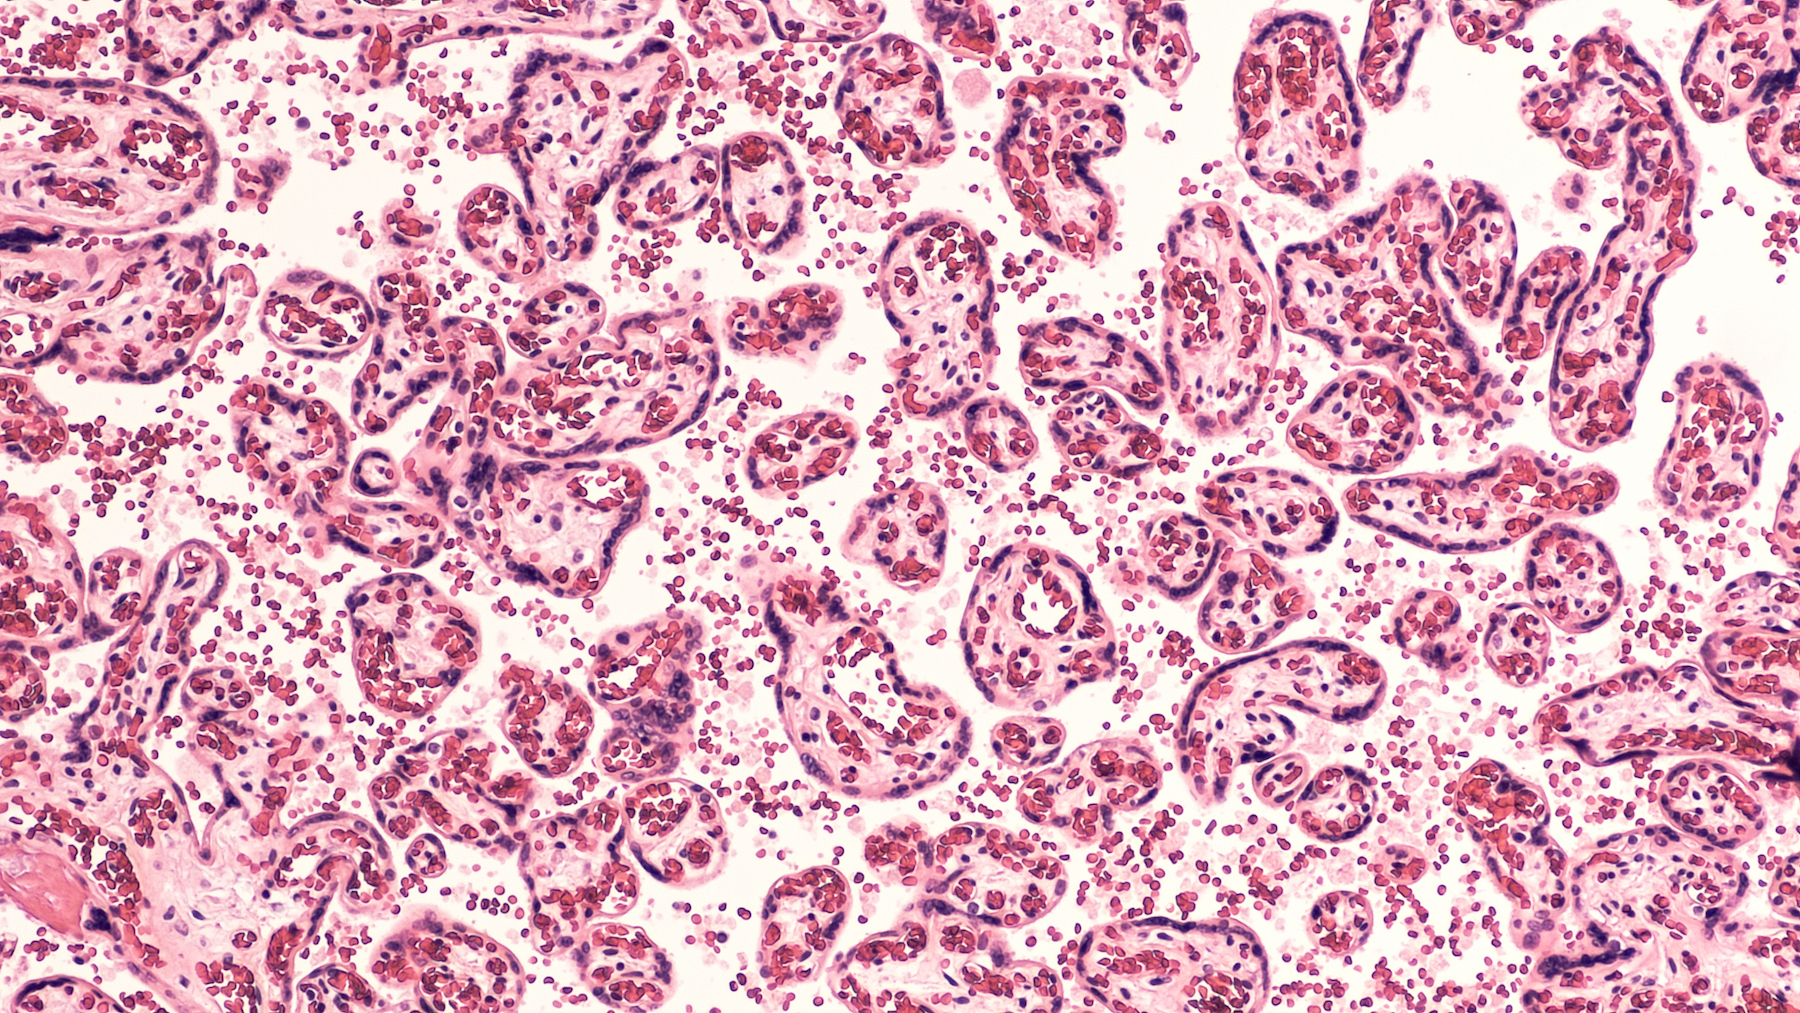 Microscopic image of red and pink cells with globular shapes against a white background.